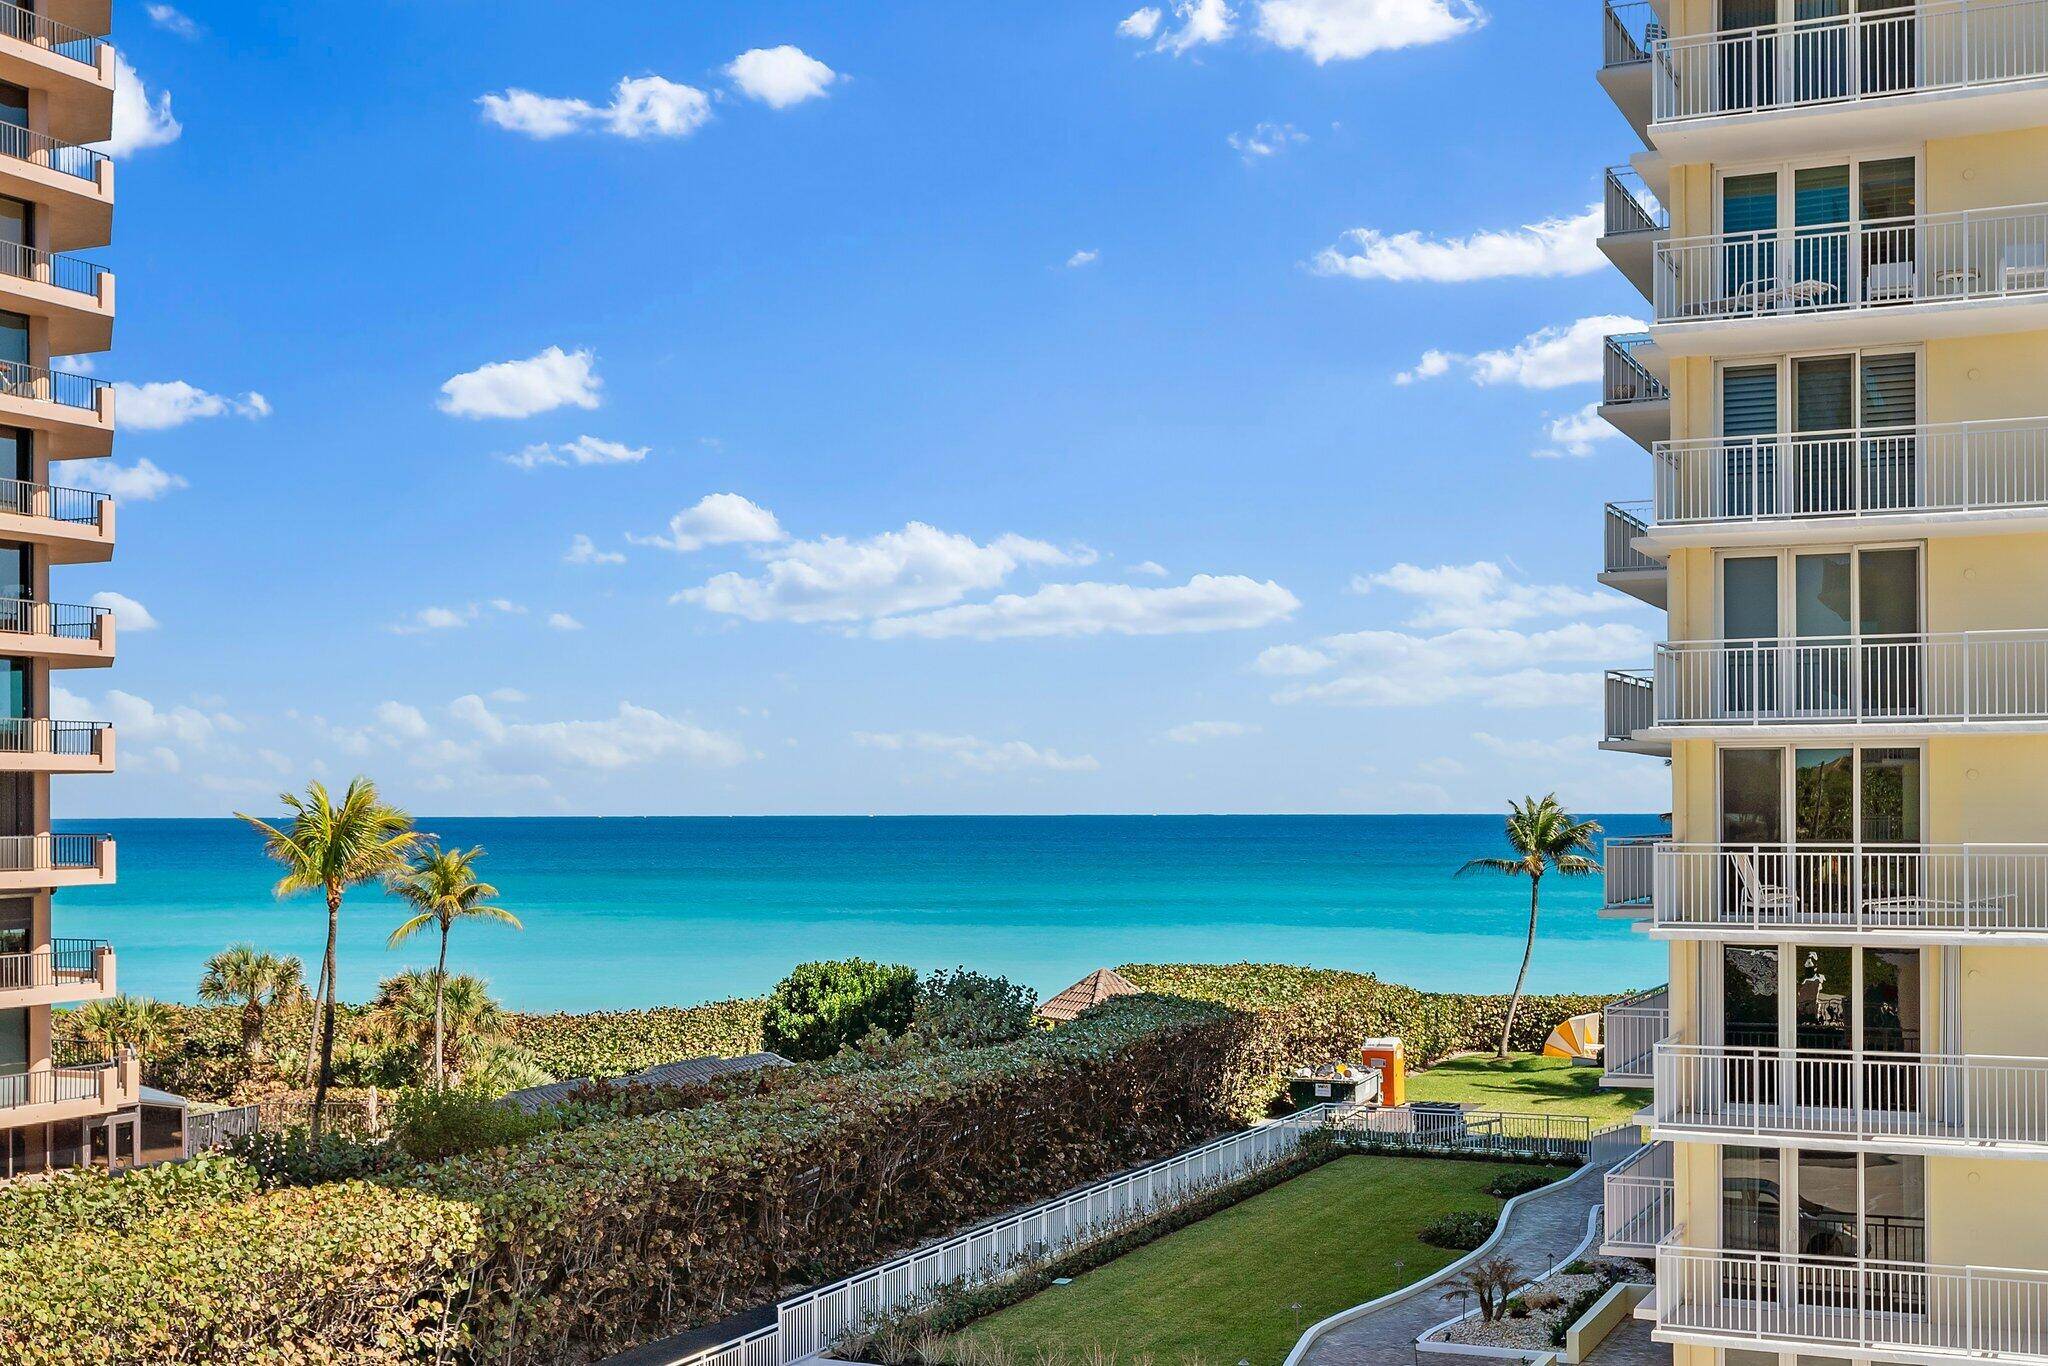 Stunning ocean views from every room in this beautiful corner unit 2 bedroom, 2.